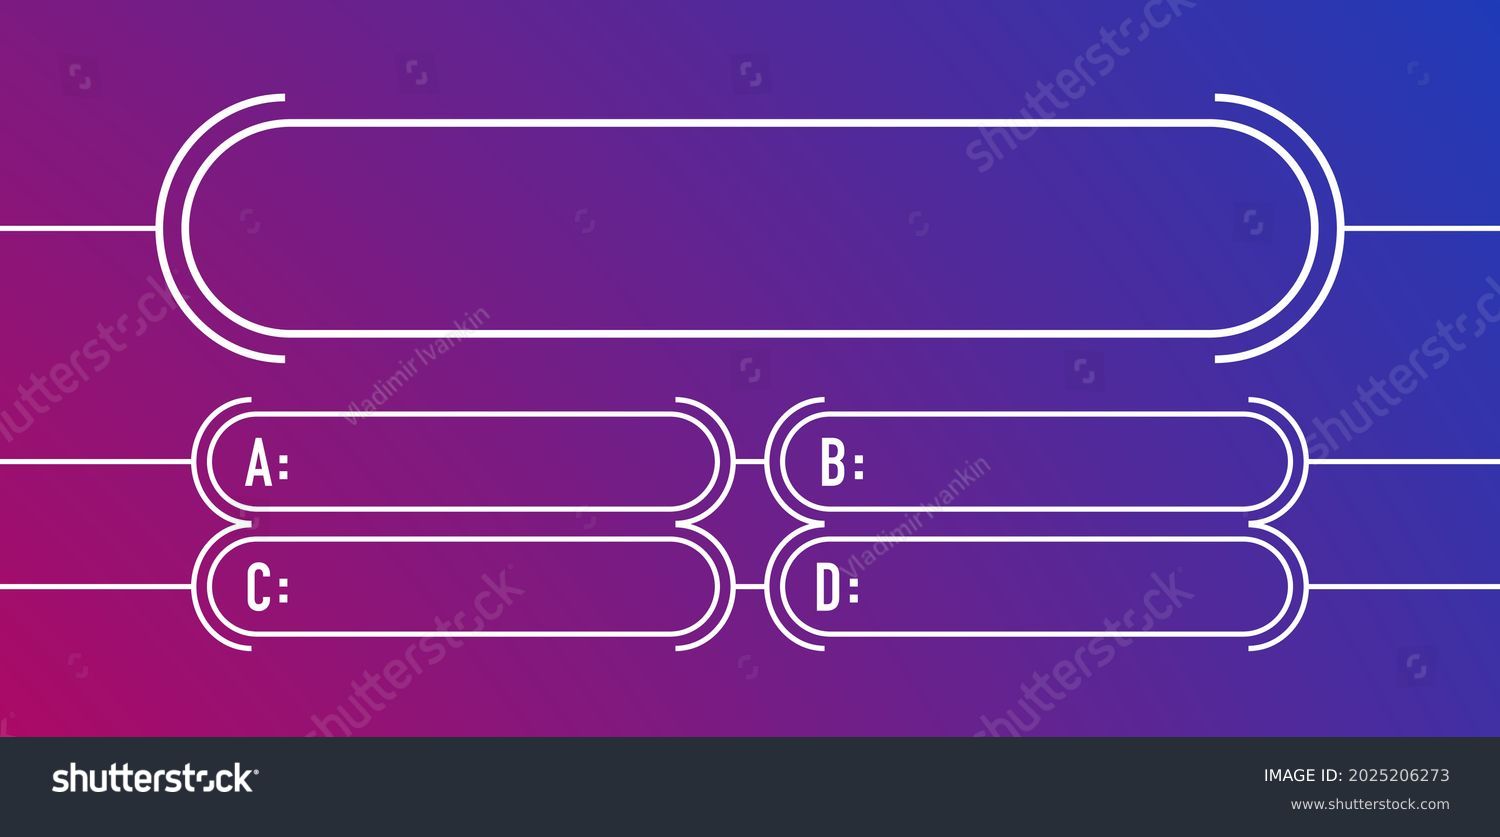 SVG of Question and answers modern style vector template for quiz game, exam, tv show, school, examination test. Illustration 10 eps svg